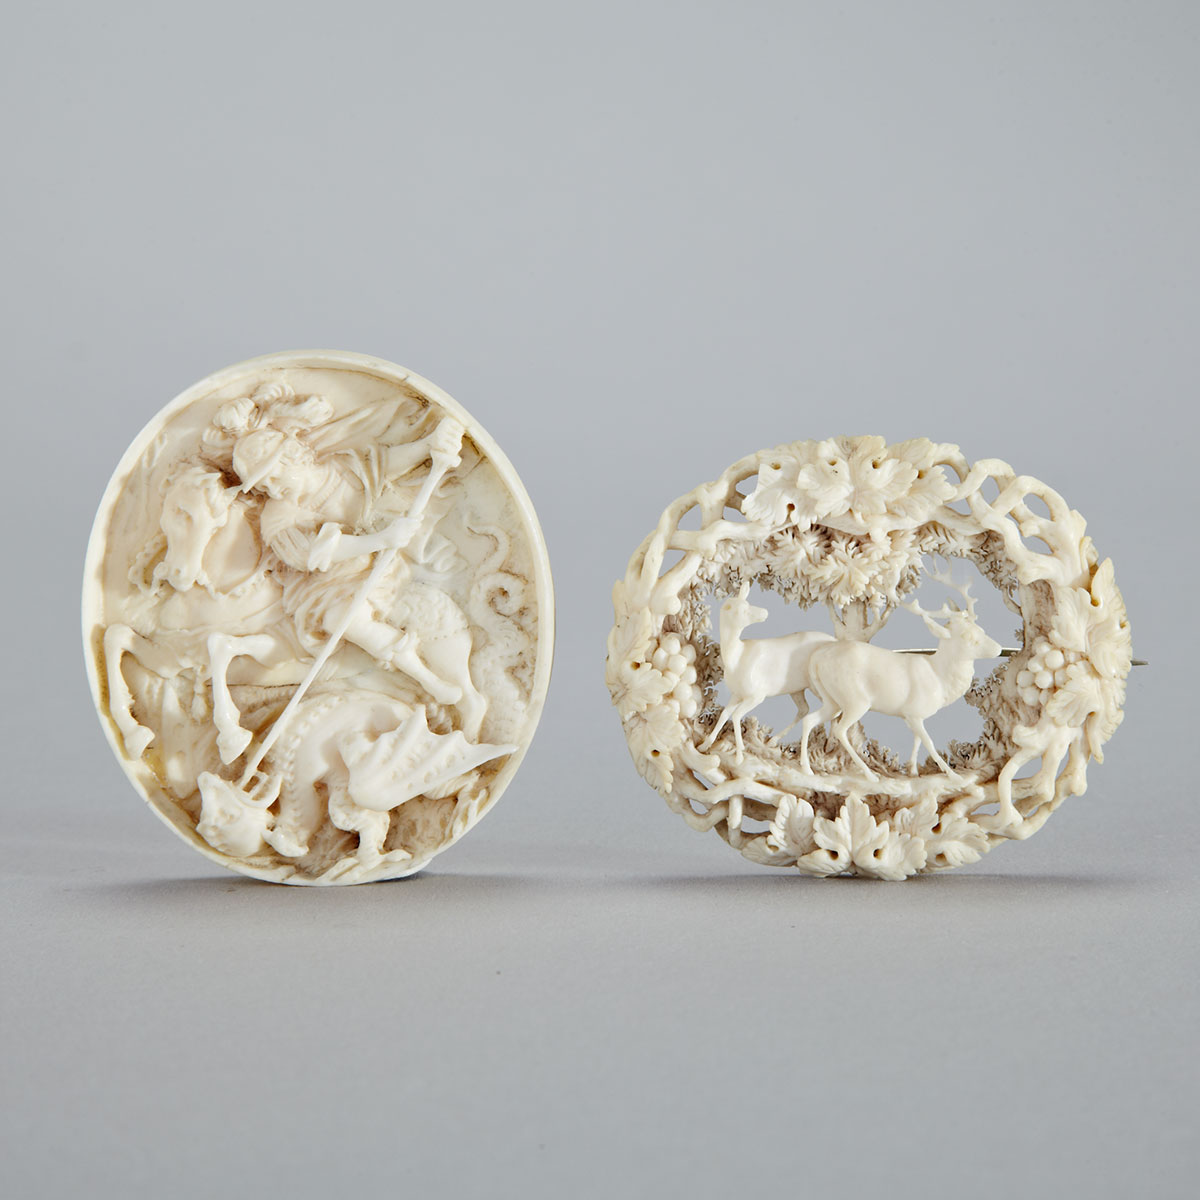 German Carved Ivory Oval Medallion and a Brooch, 19th century